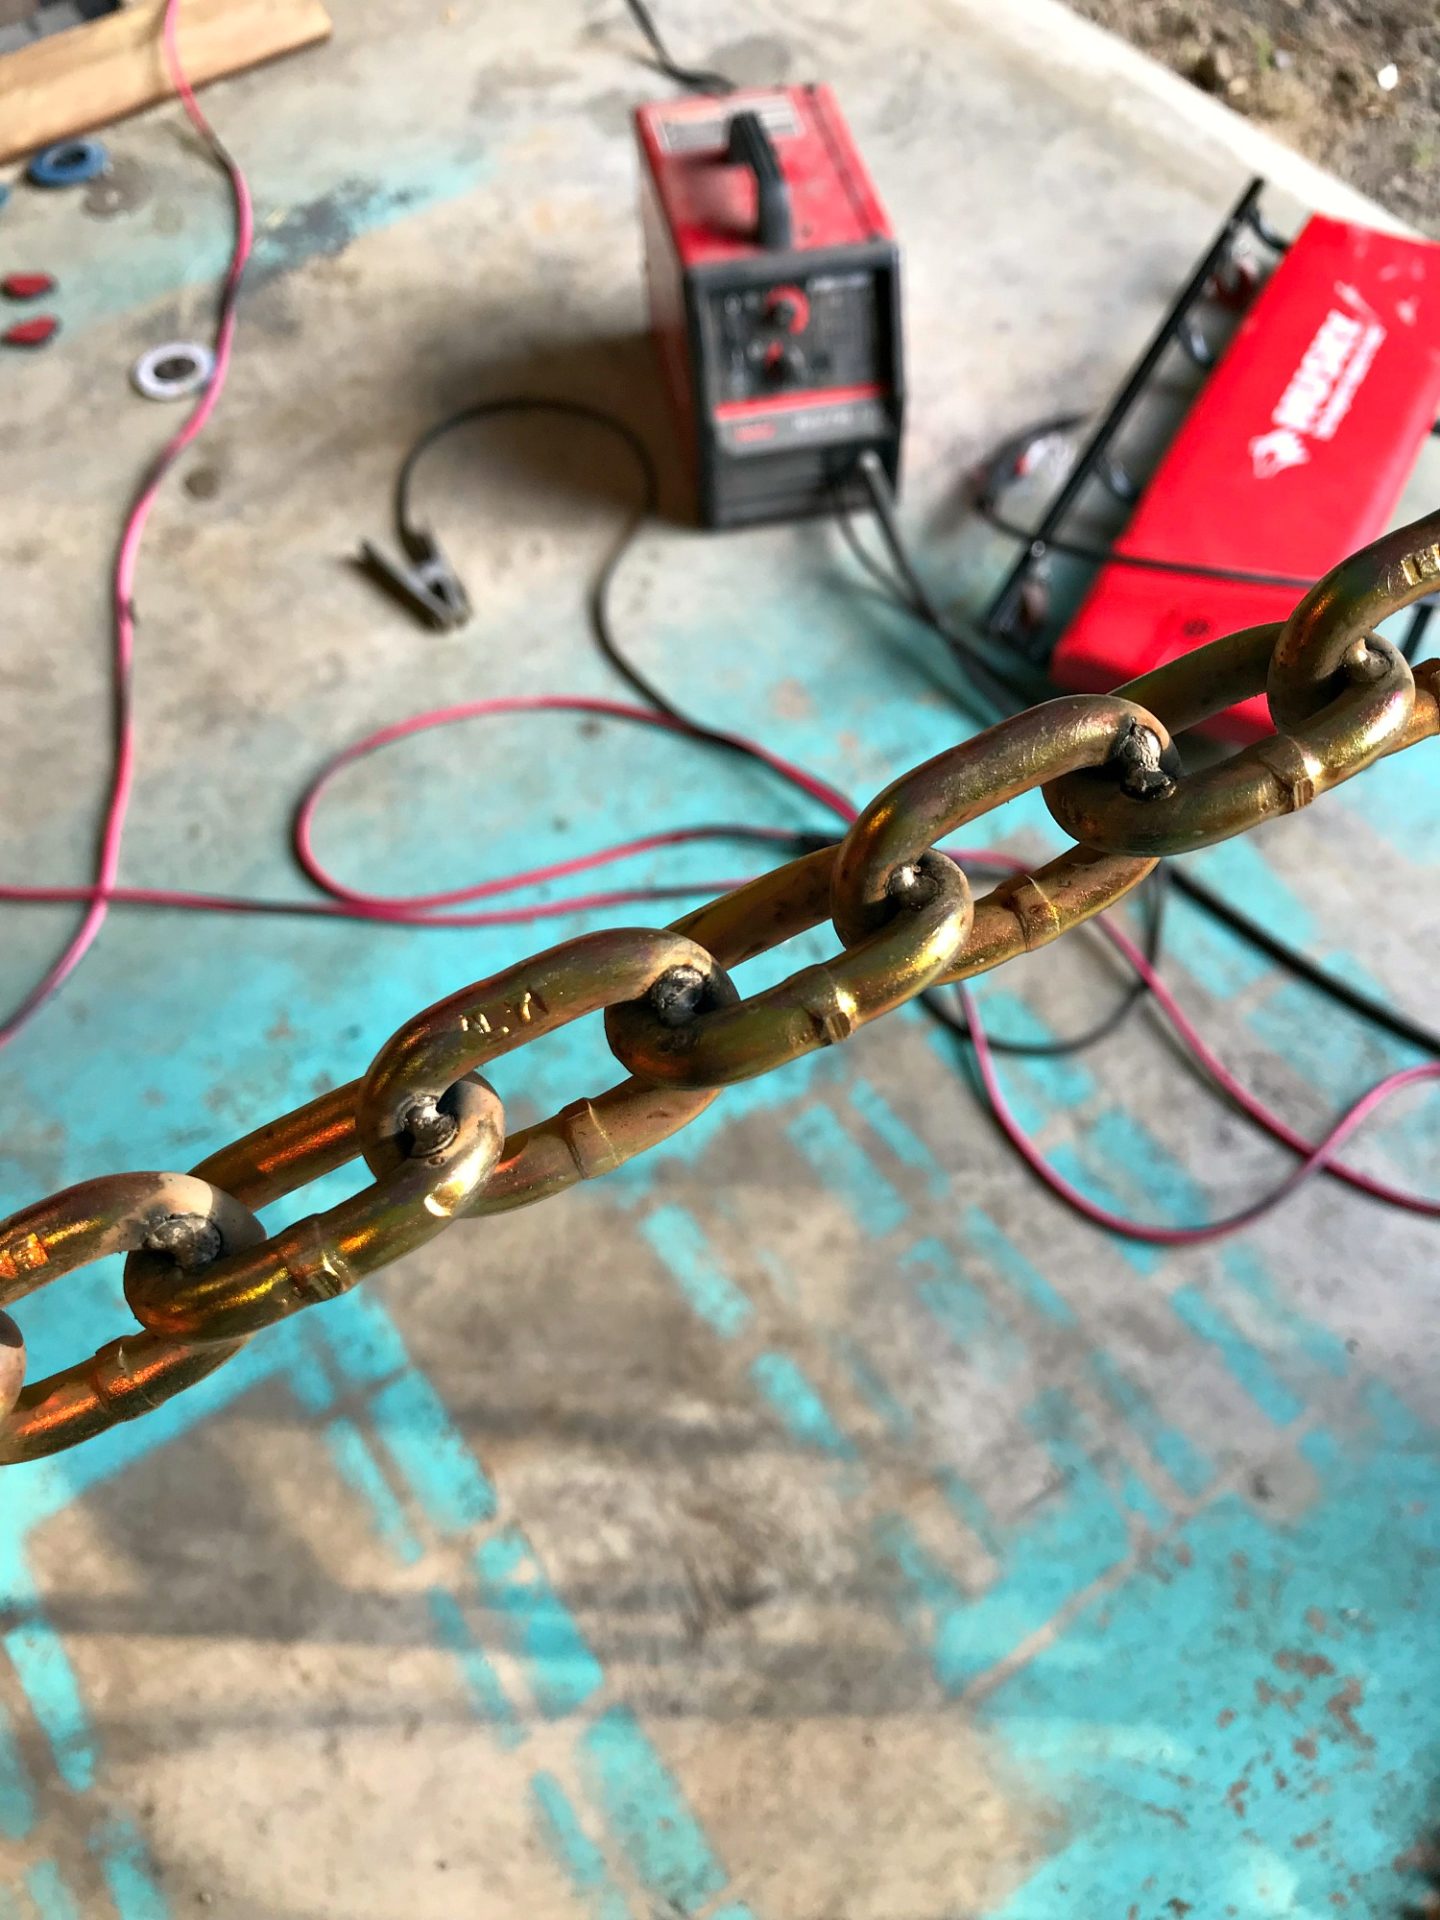 How to Weld Chain | DIY Welded Chain Table Legs